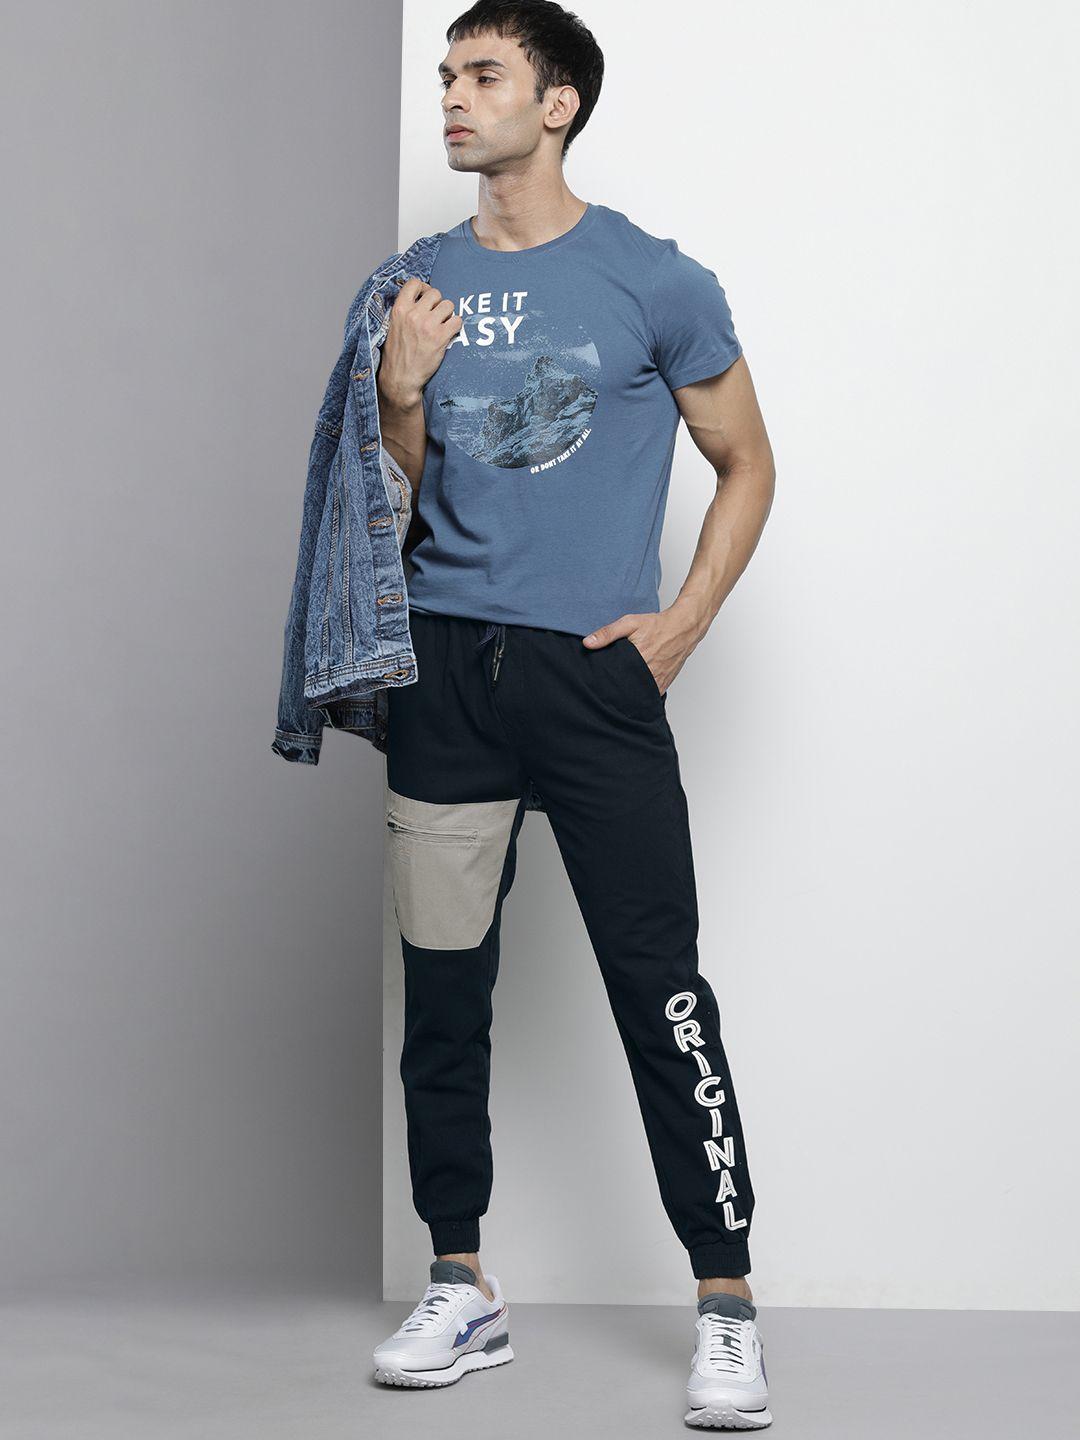 the-indian-garage-co-men-navy-blue-printed-joggers-trousers